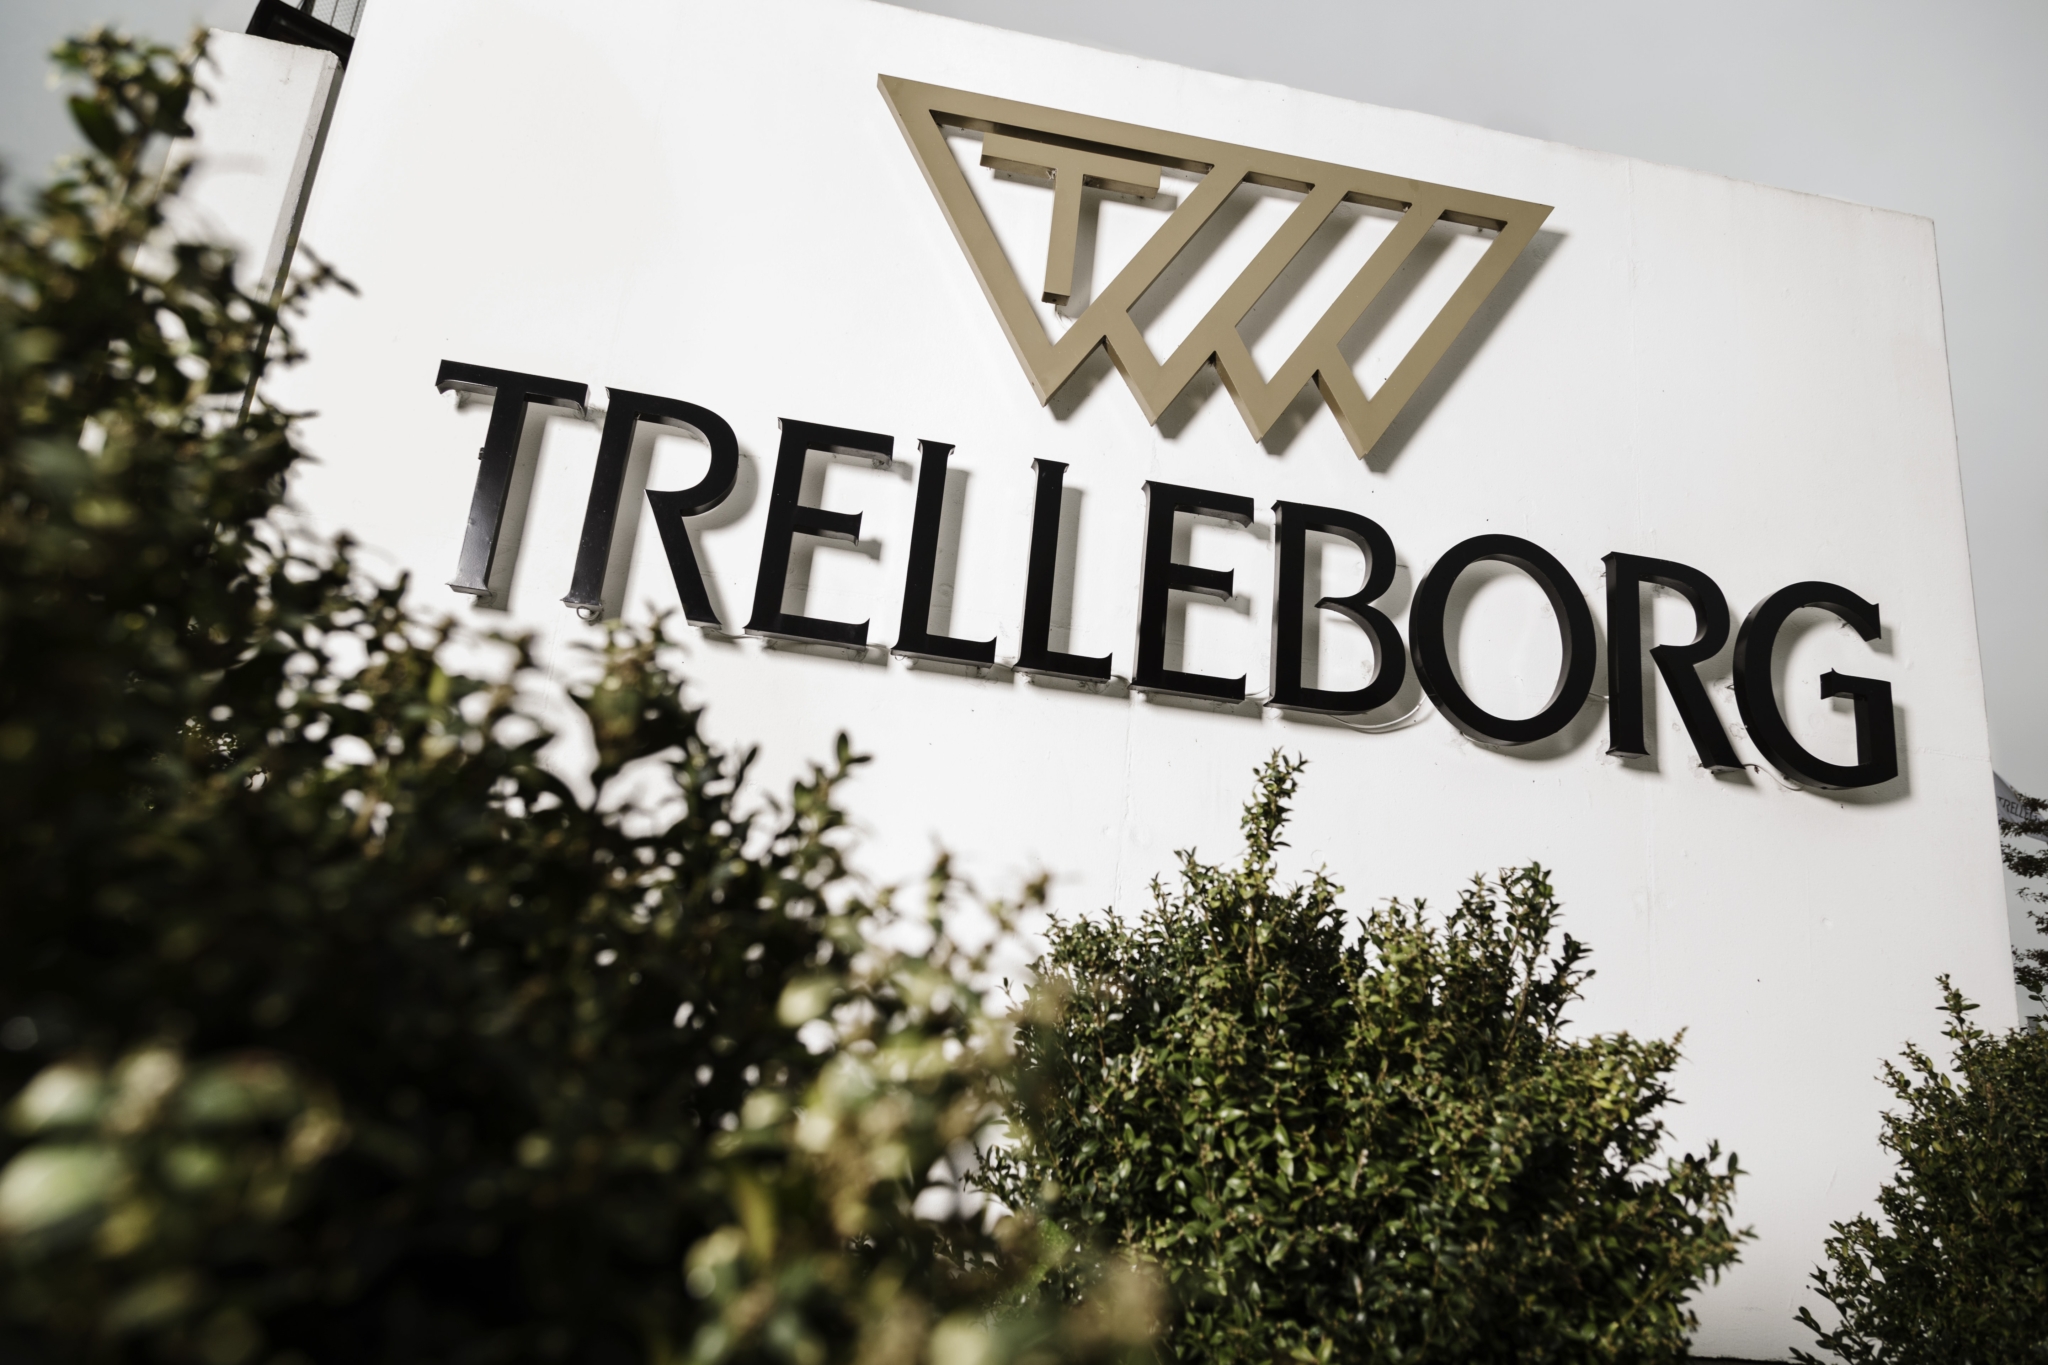 Lower raw material exposure and better ESG profile – What Trelleborg gains from TWS sale